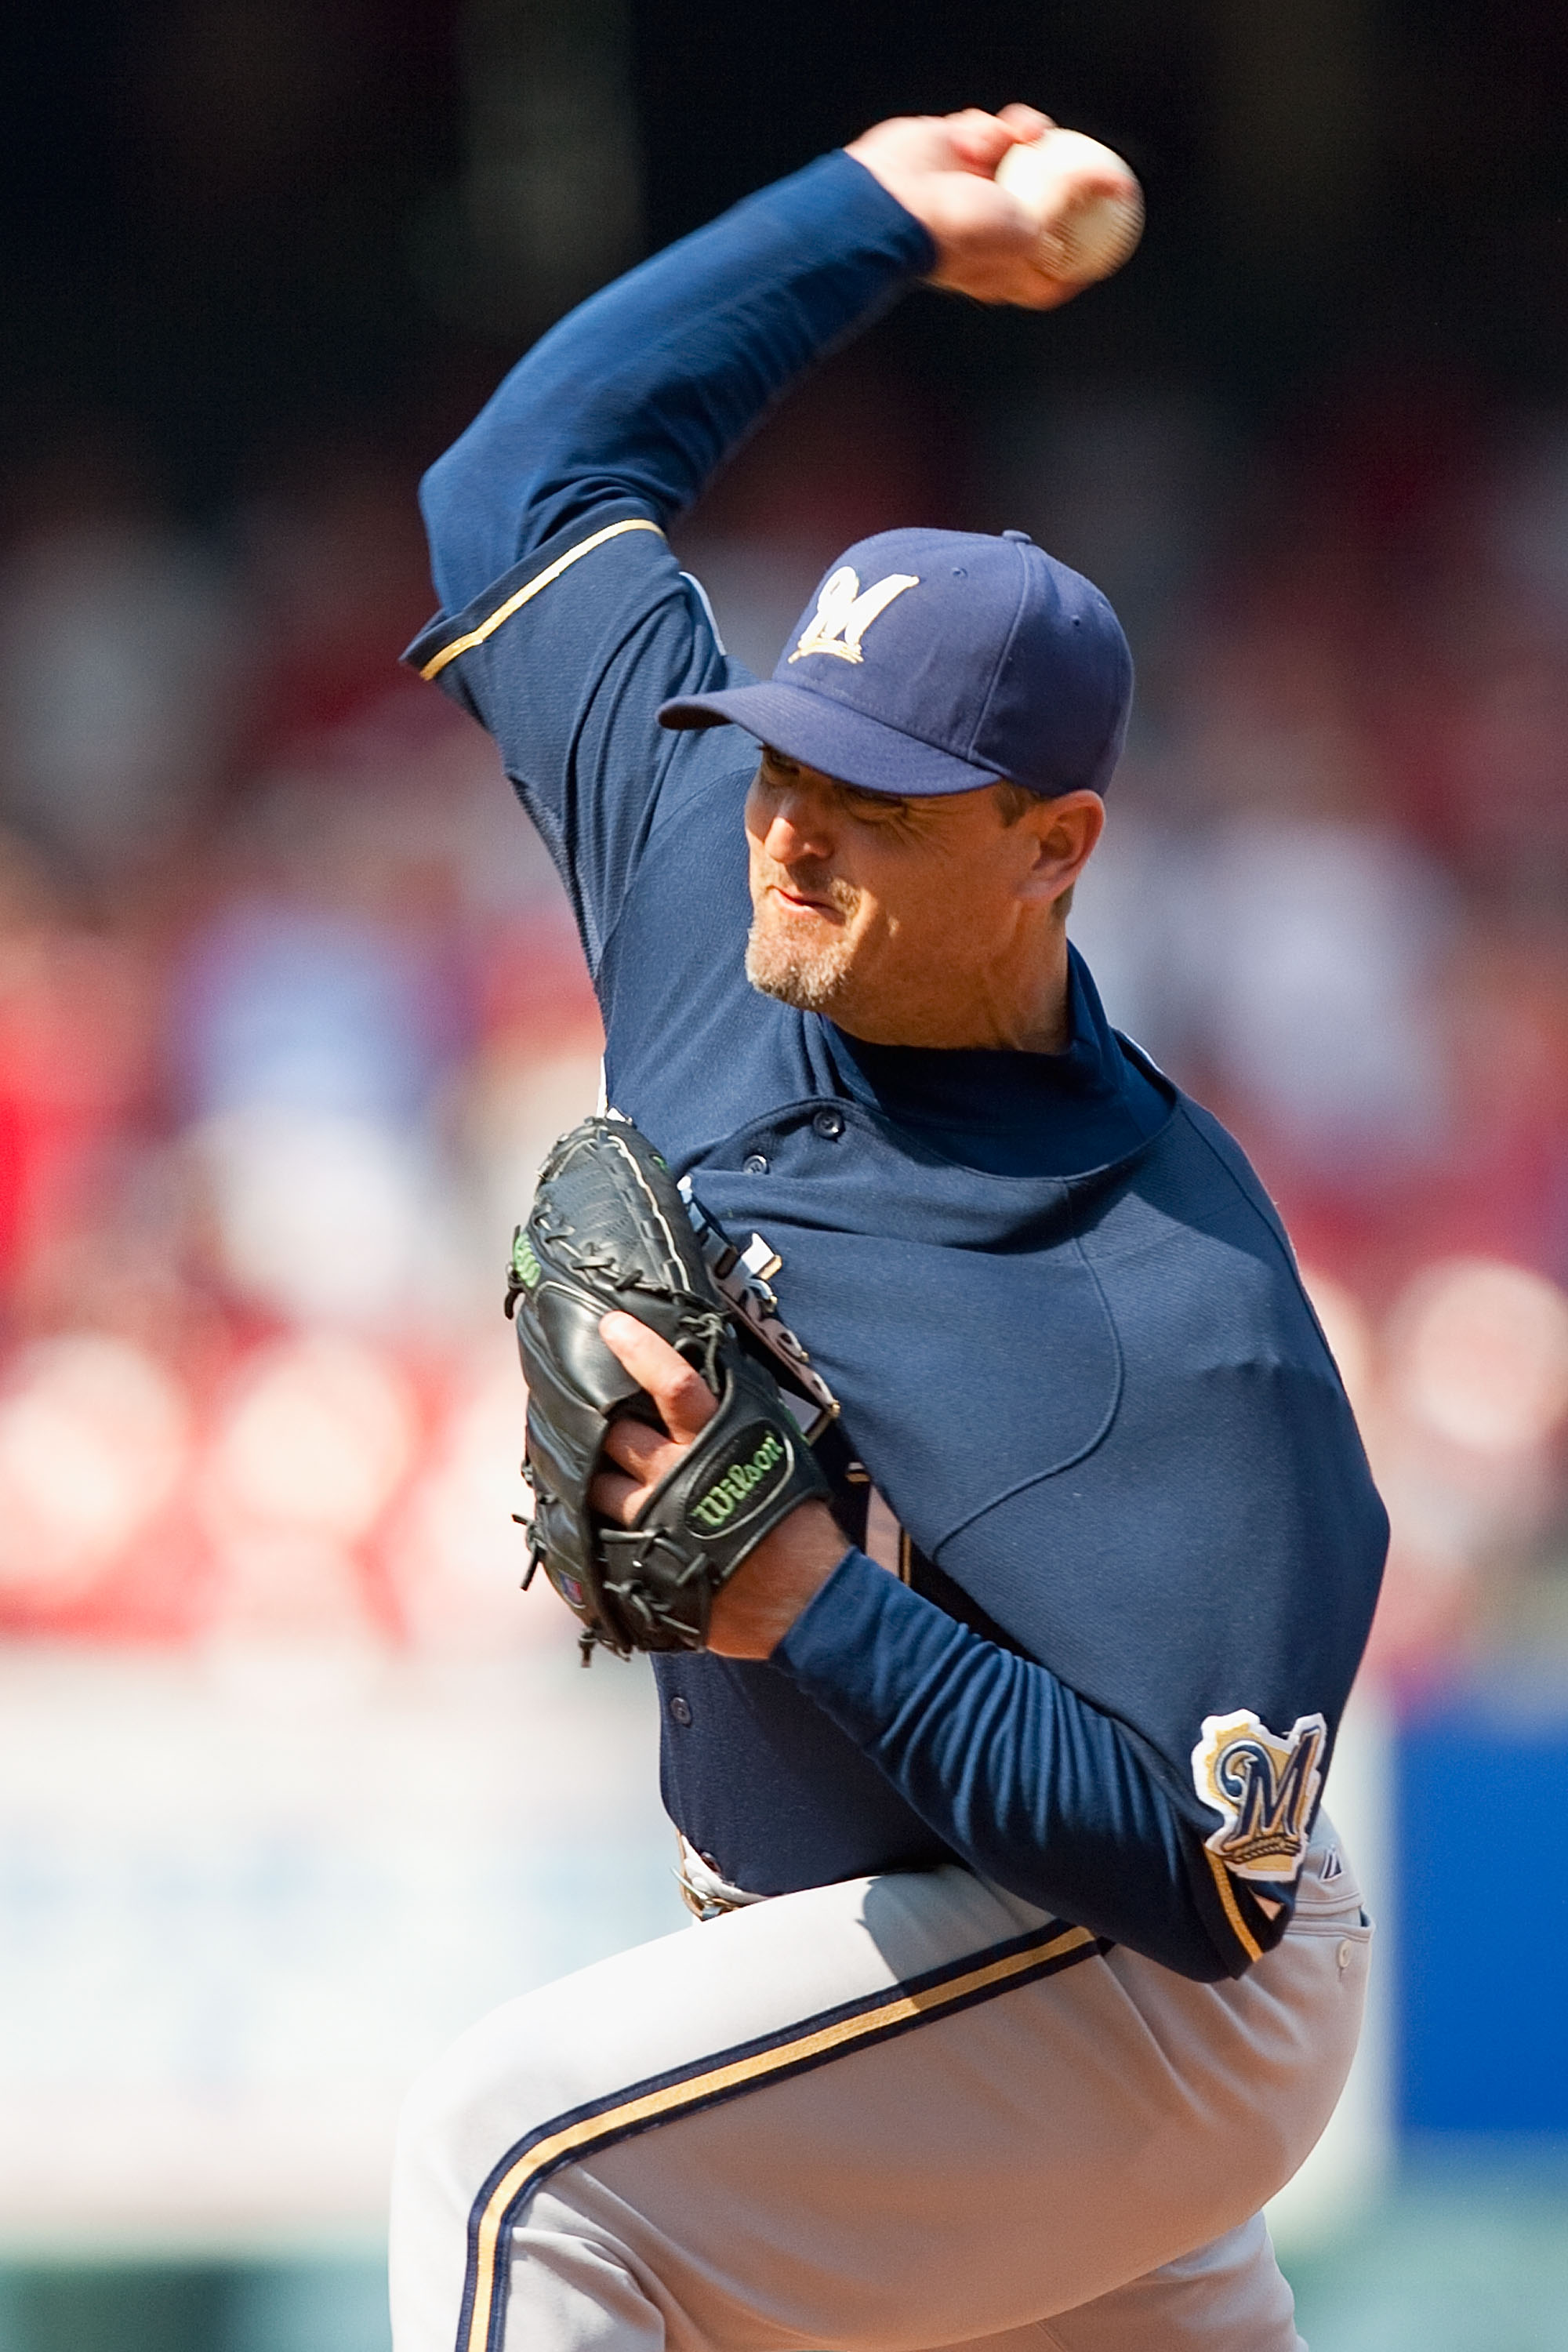 Trevor Hoffman delivers a pitch en route to recording career save #598 in St. Louis on Wednesday, August 18, 2010.